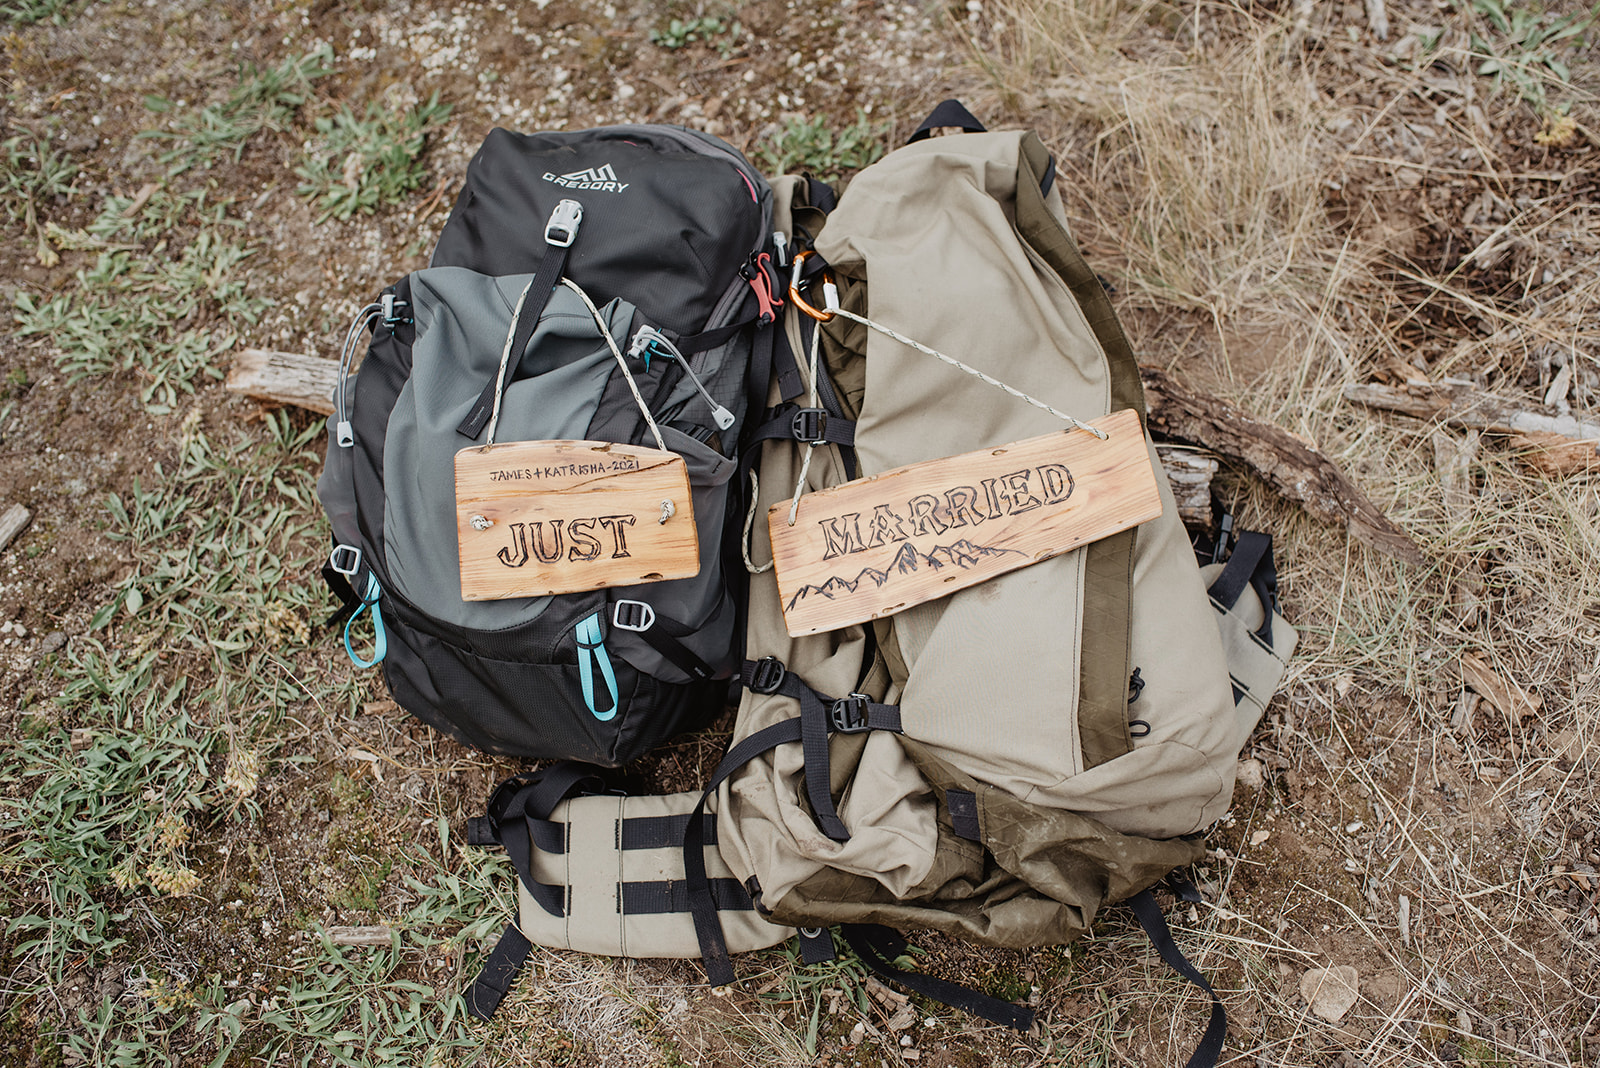 bride and groom back packs with just married signs on them on a hiking trail in the Tetons